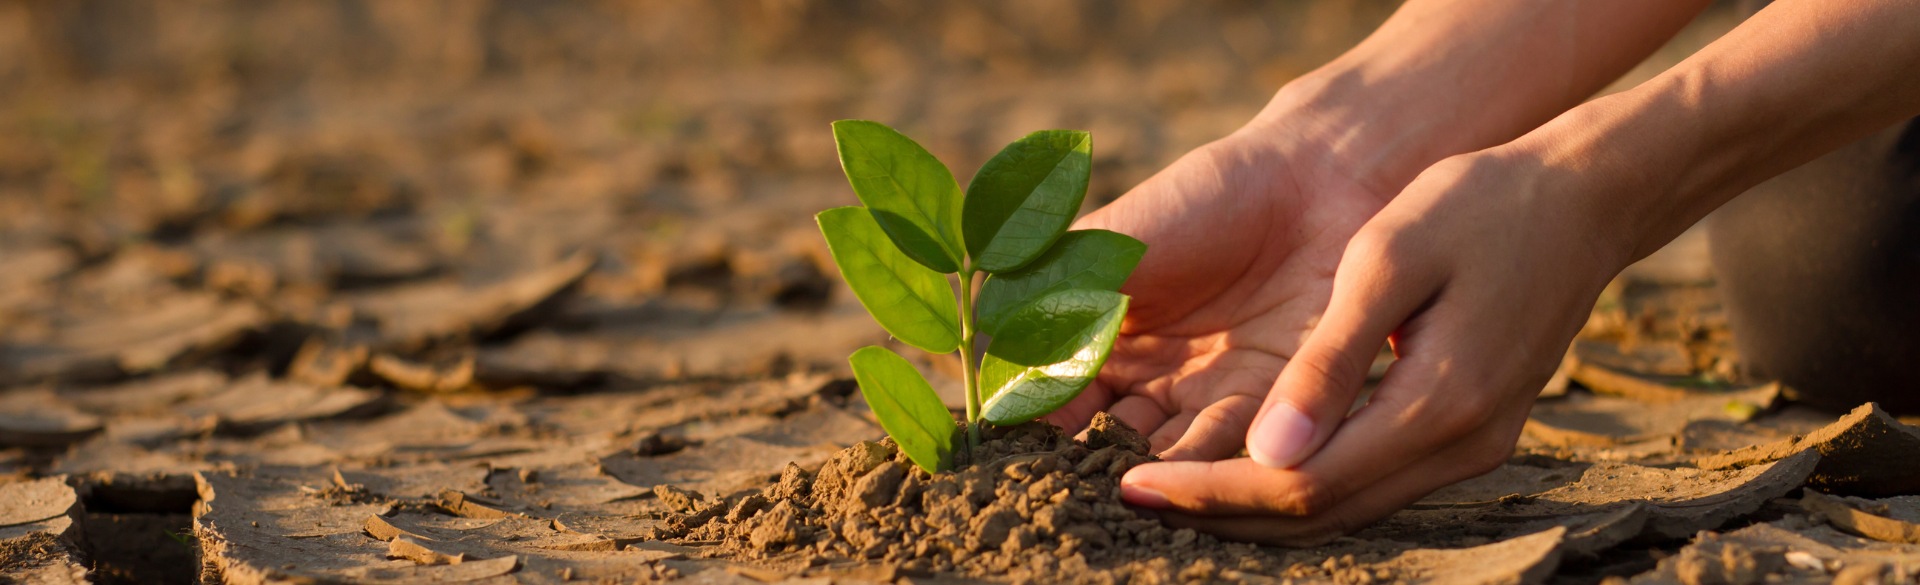 Person's hands holding plant in ground